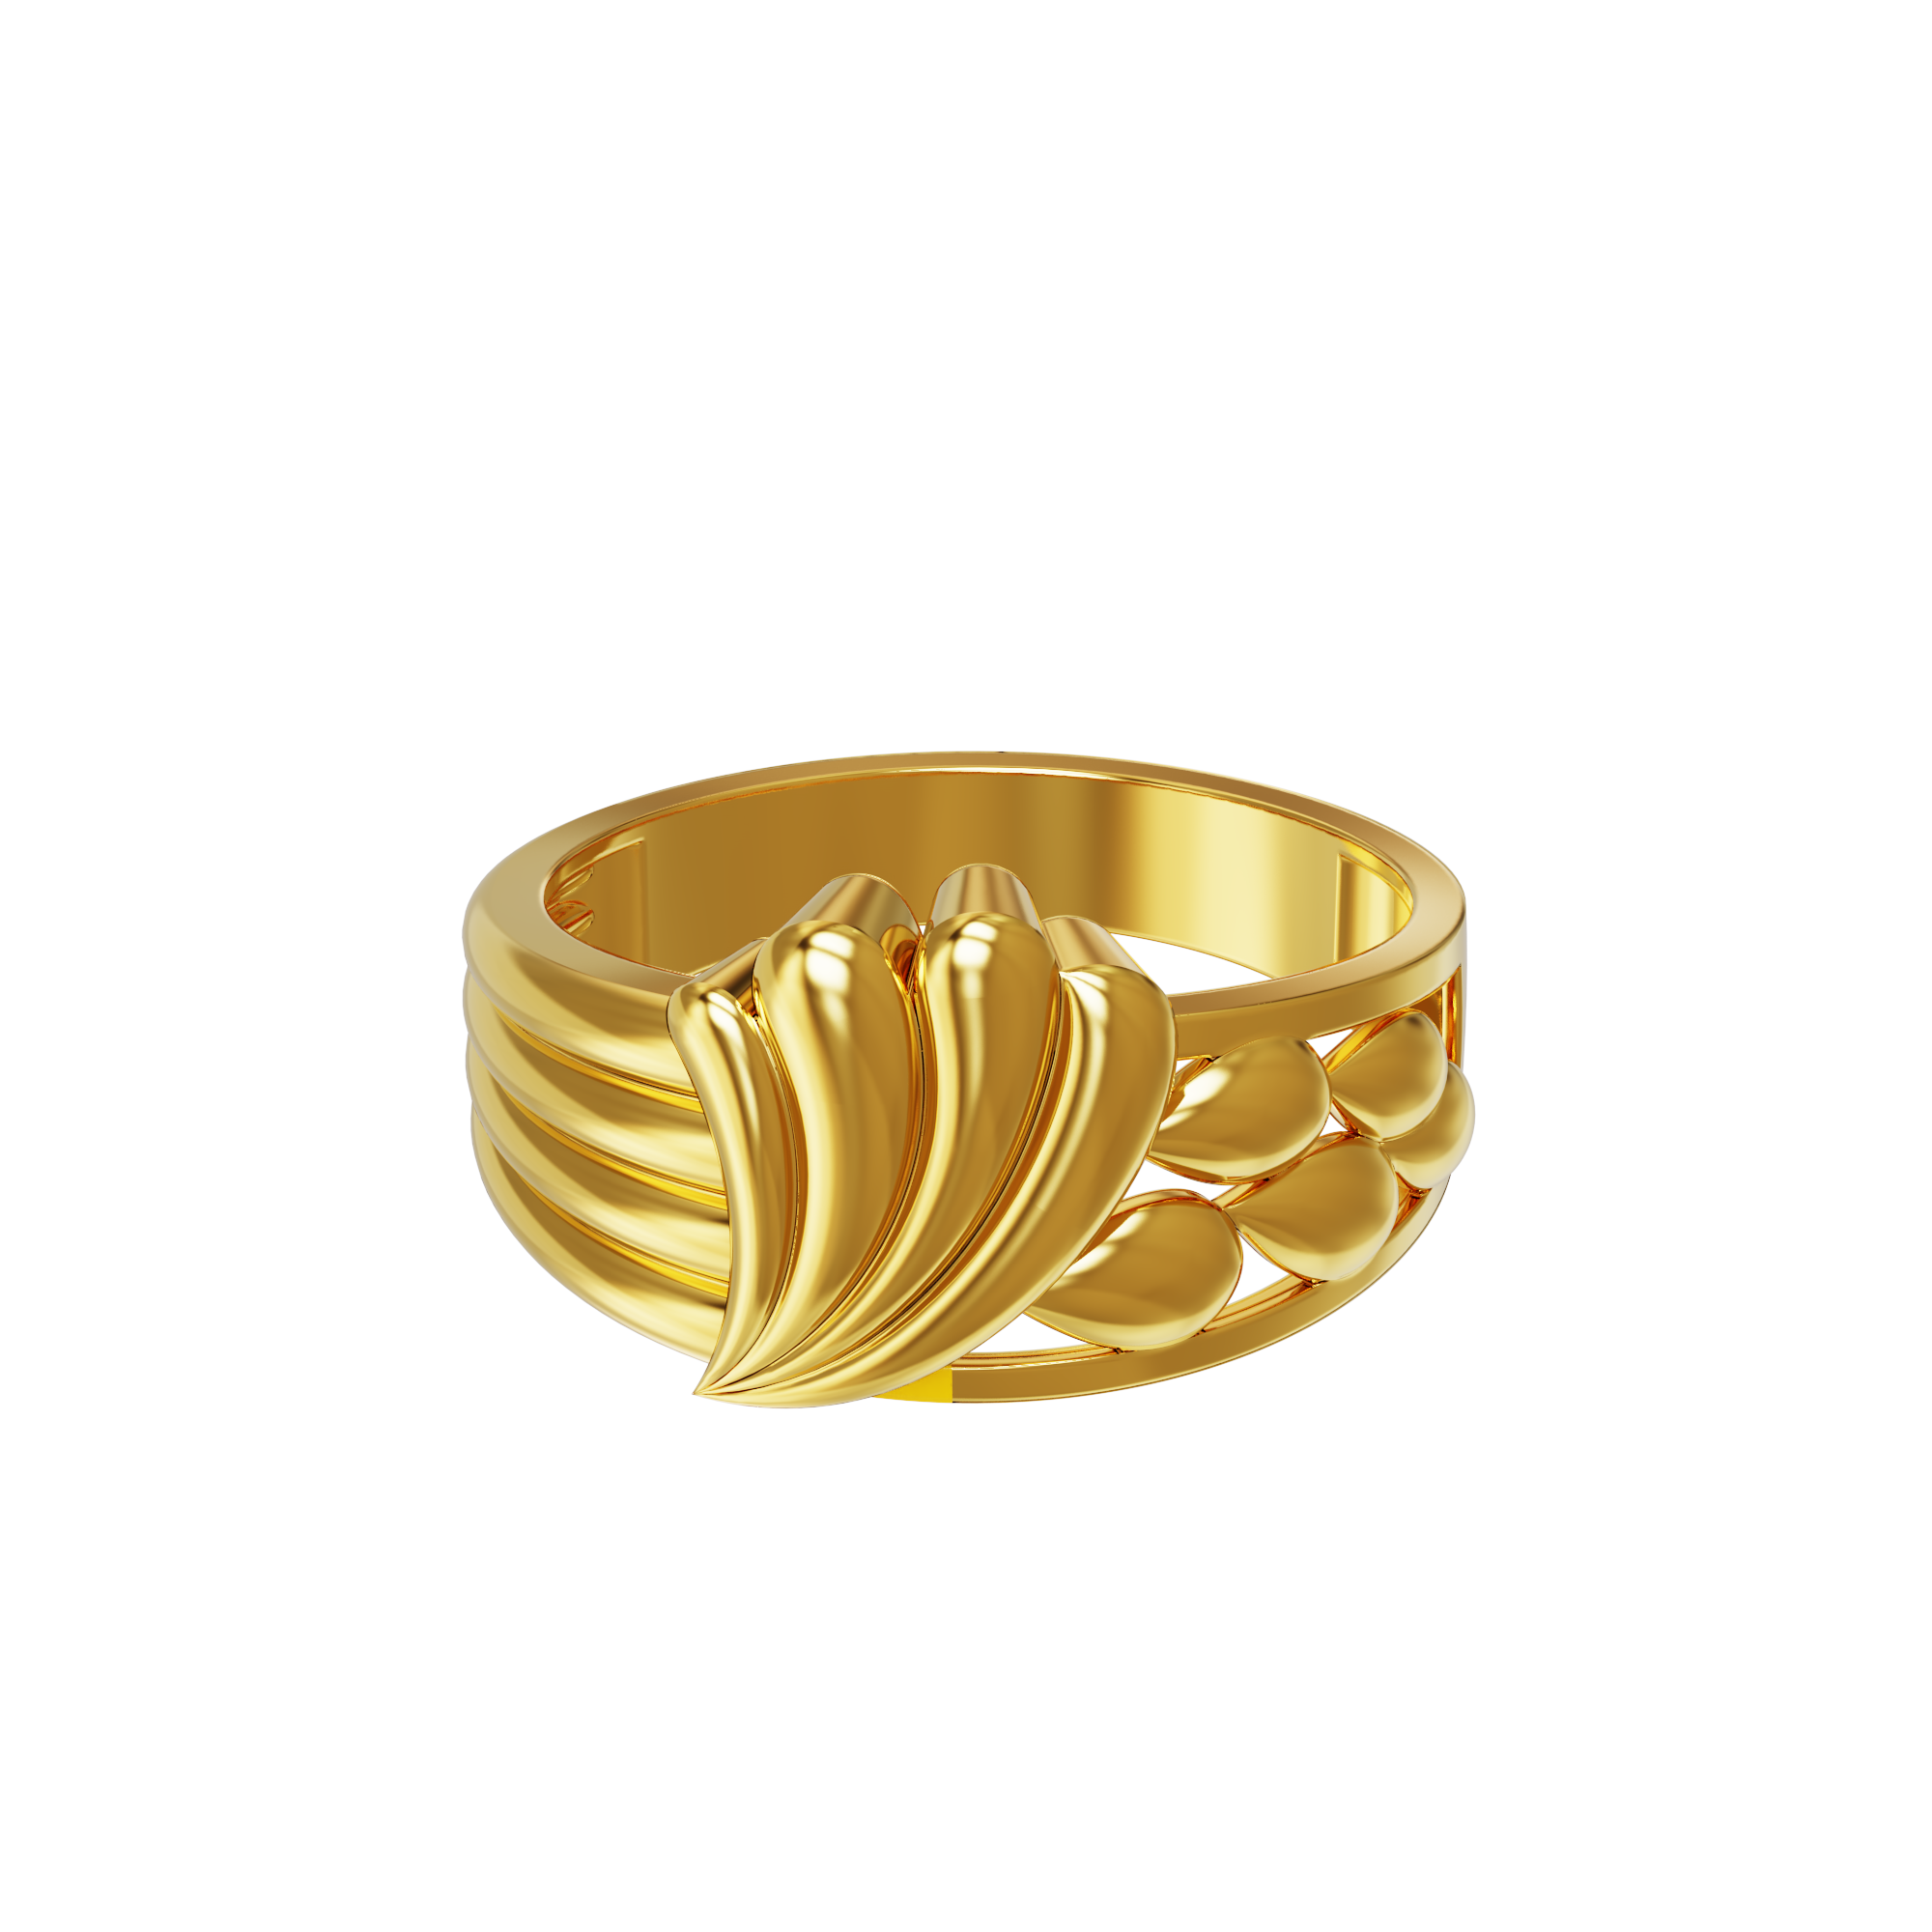 Latest Gold Ring Designs in India | Buy Online